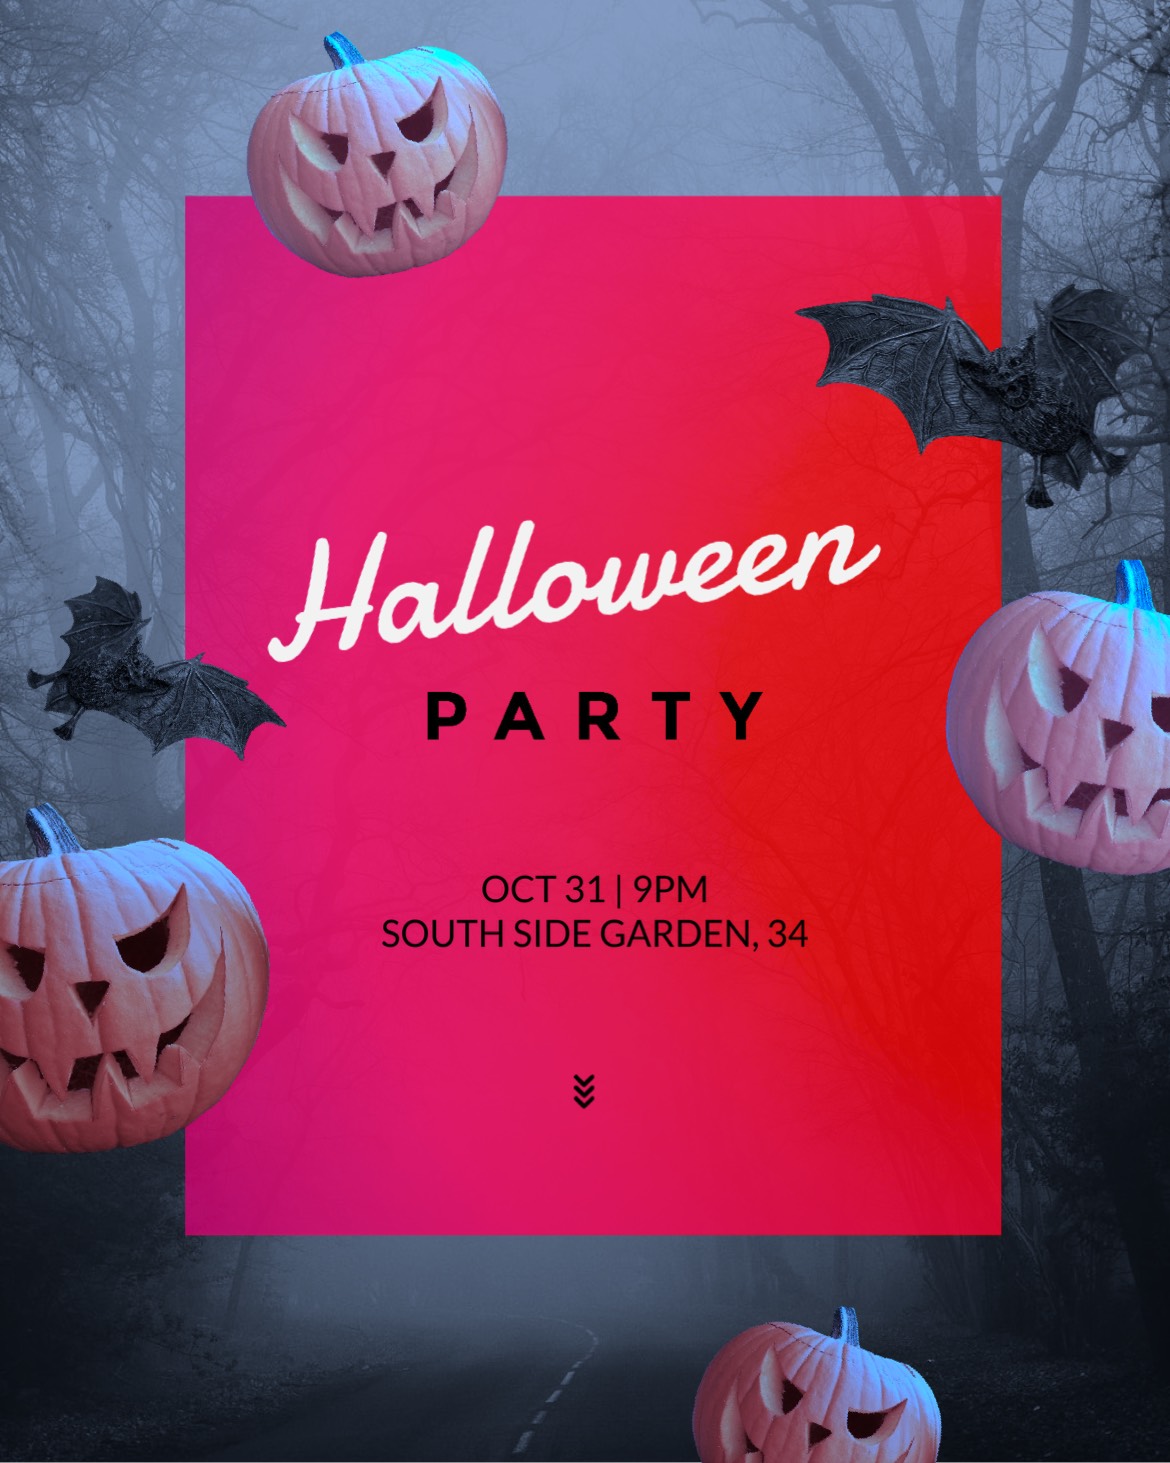 A Halloween Party Poster With Pumpkins And Bats Halloween Template